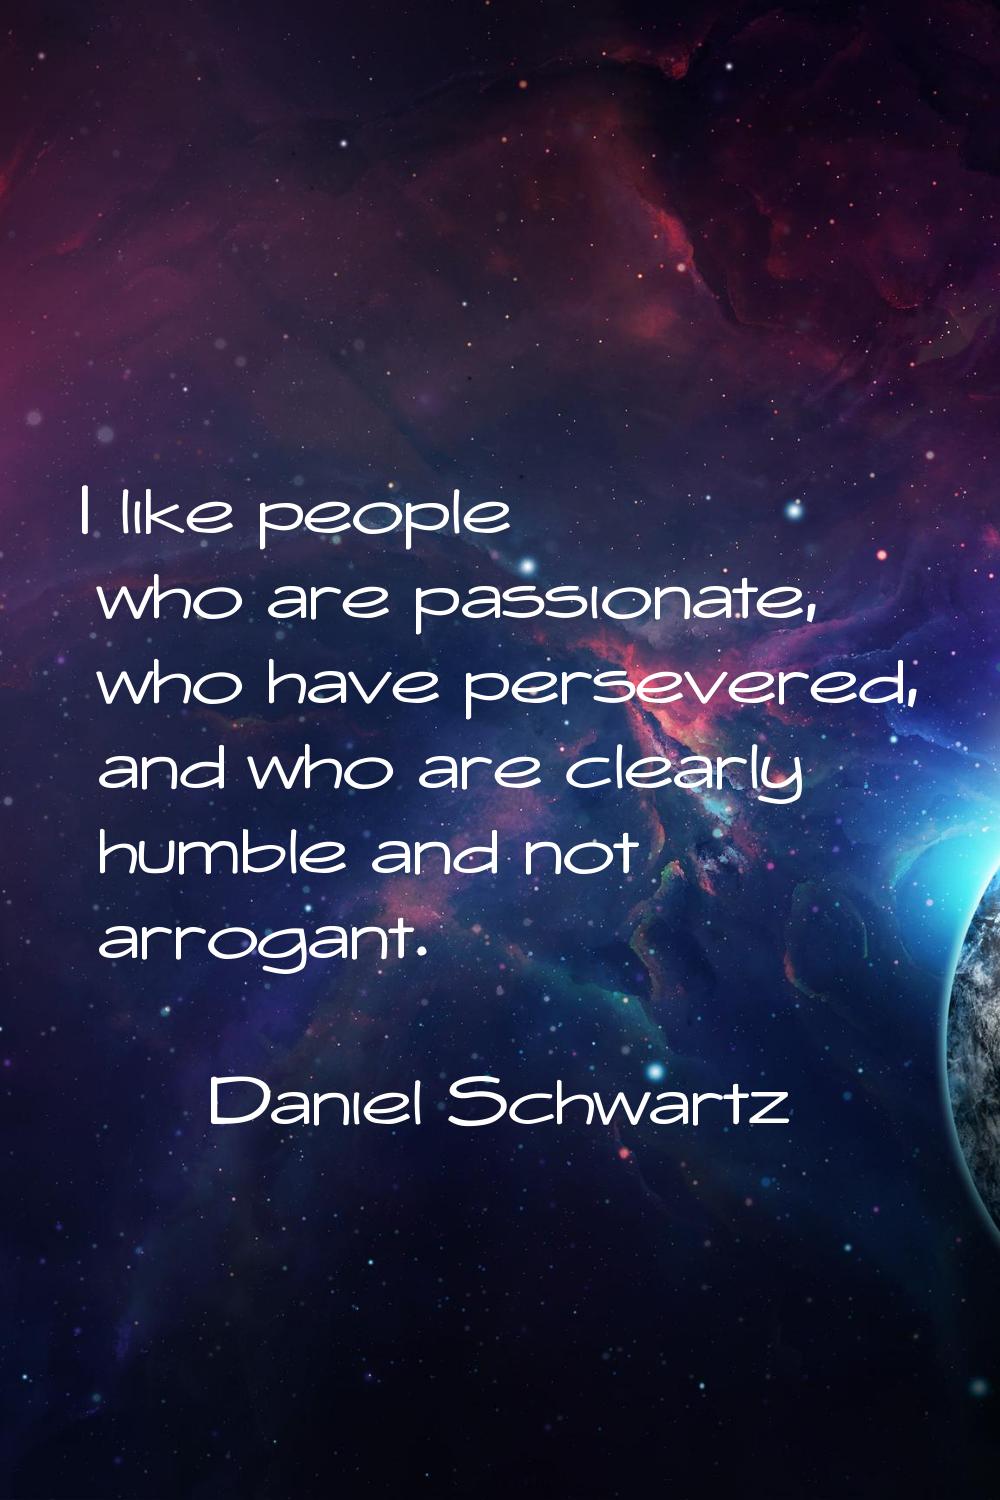 I like people who are passionate, who have persevered, and who are clearly humble and not arrogant.